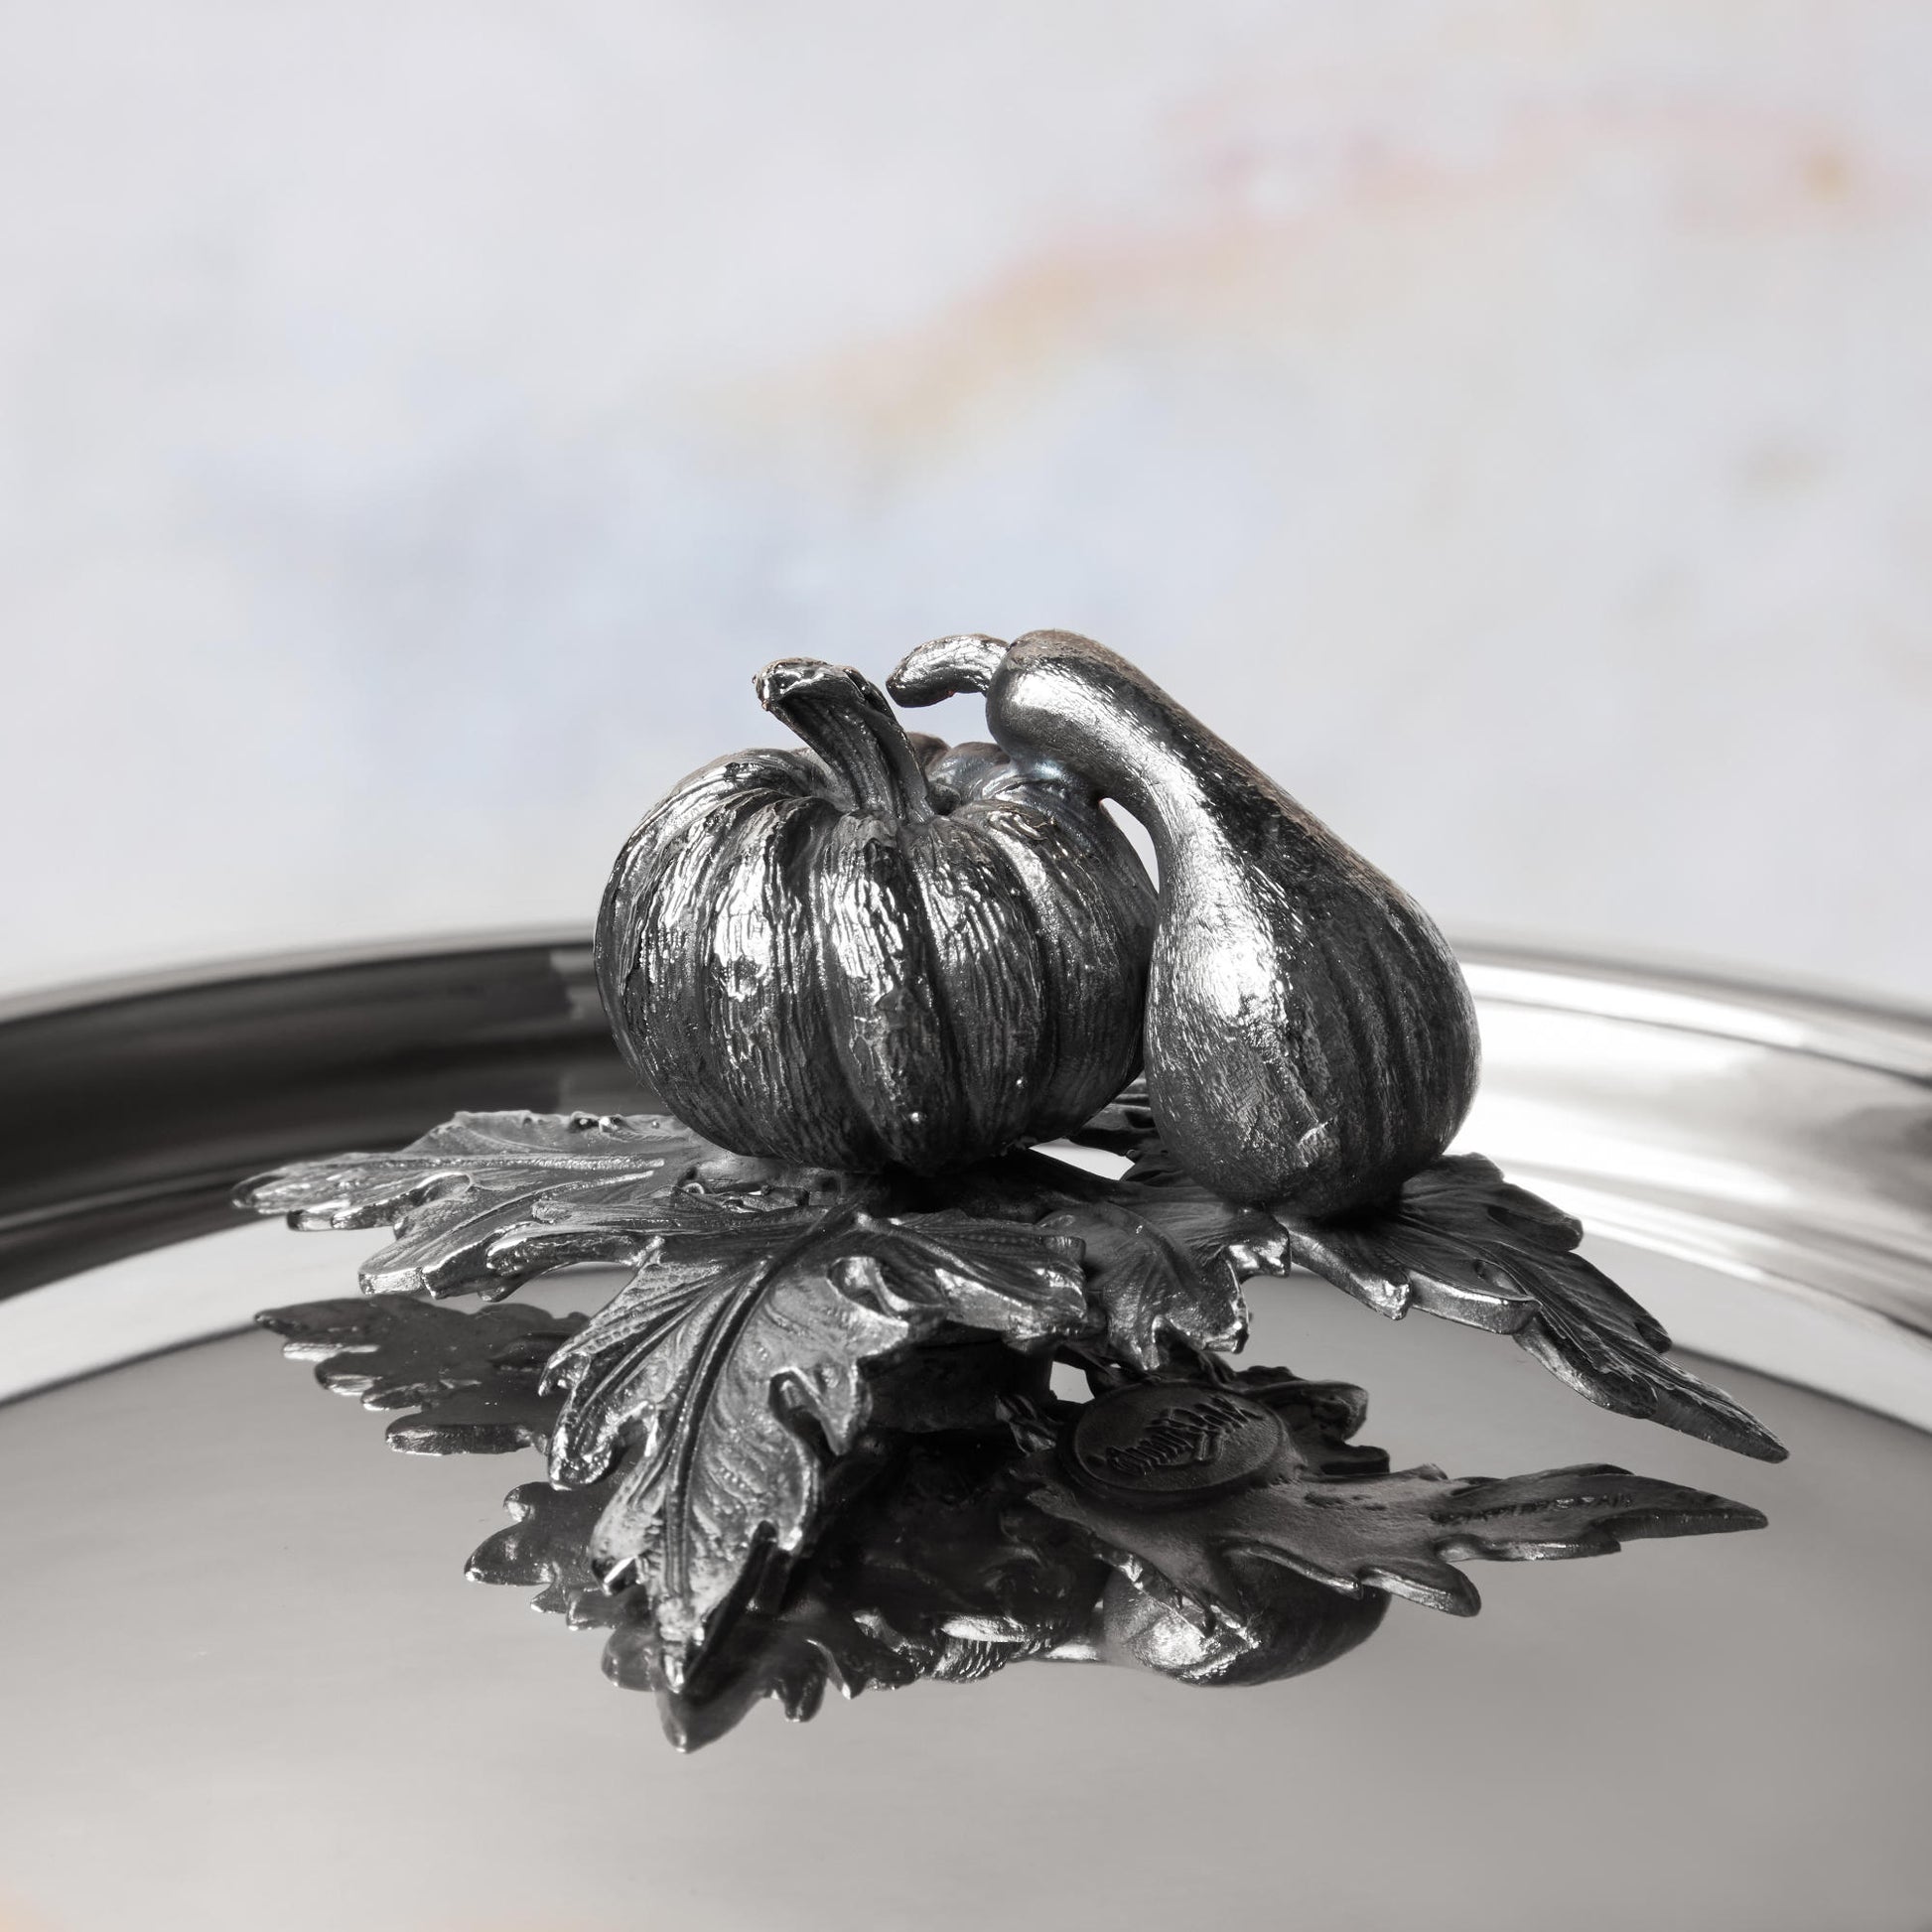 Decorated knob finial representing pumpkin and gourd, cast in solid bronze and silver plated, on Opus Prima stainless steel lid by Ruffoni